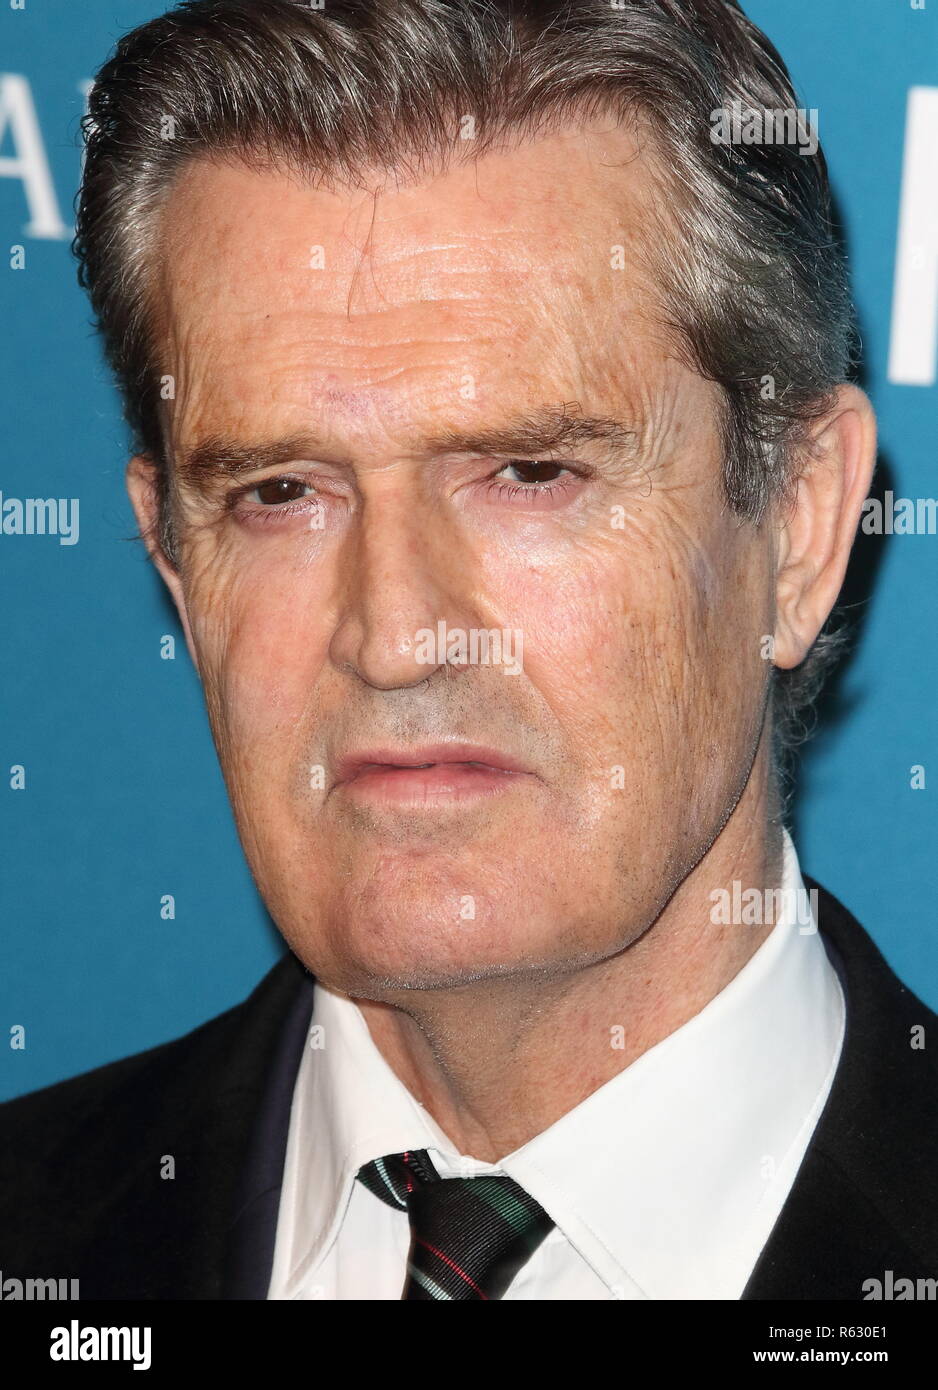 London, UK. 2nd Dec, 2018. Rupert Everett seen during the British Independent Film Awards at the Old Billingsgate. Credit: Keith Mayhew/SOPA Images/ZUMA Wire/Alamy Live News Stock Photo